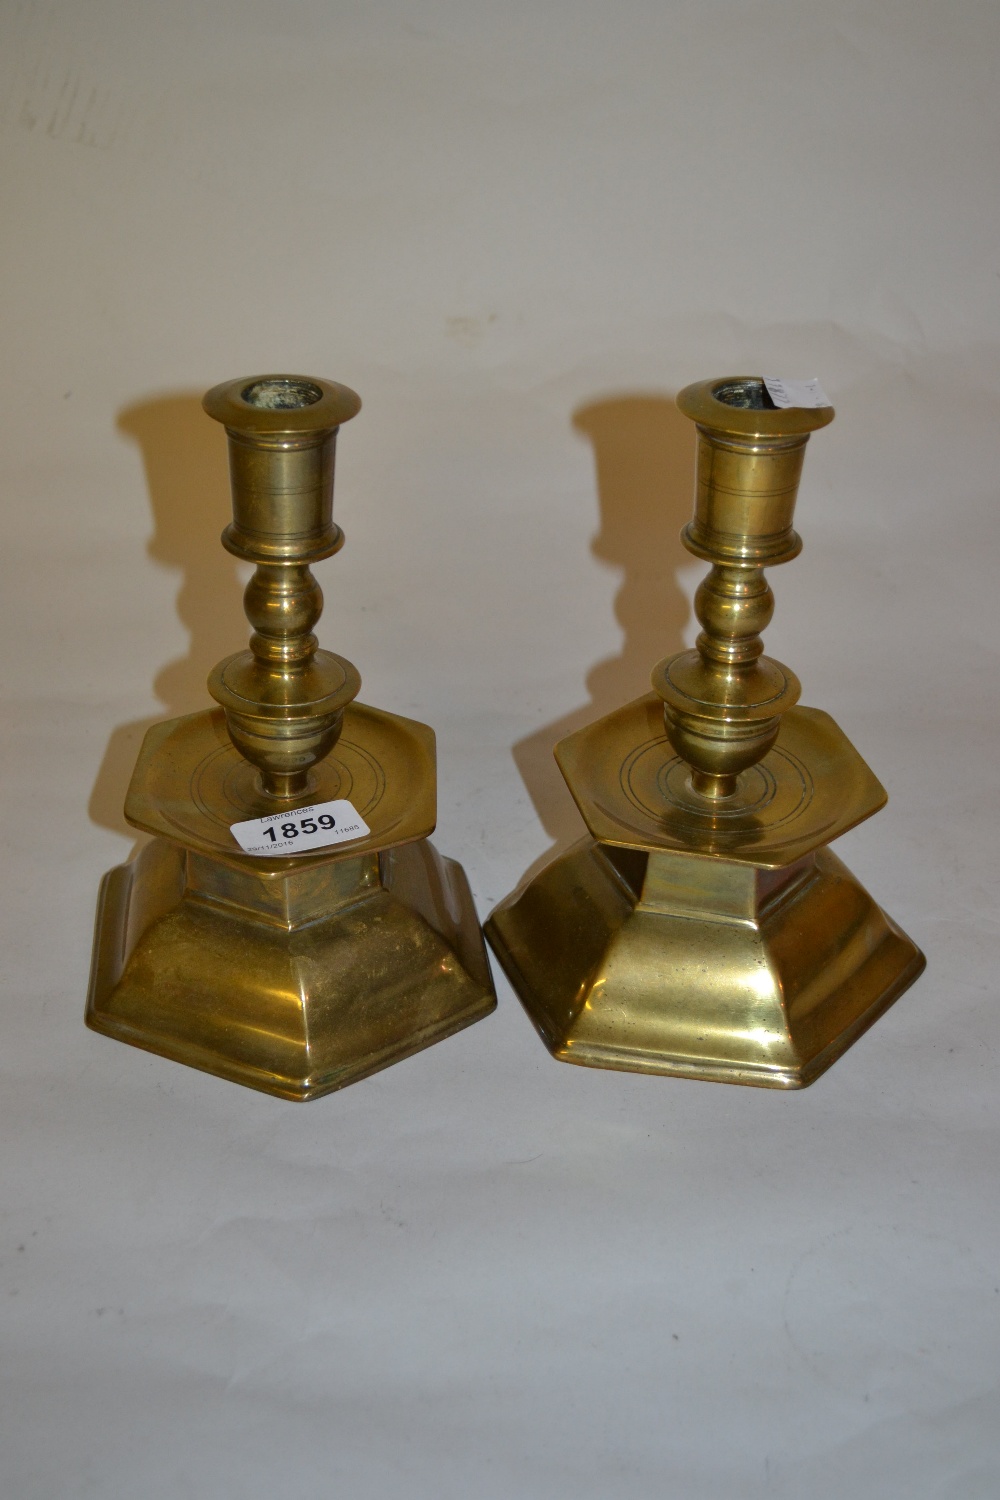 Pair of hexagonal brass candlesticks with drip trays - Image 2 of 2